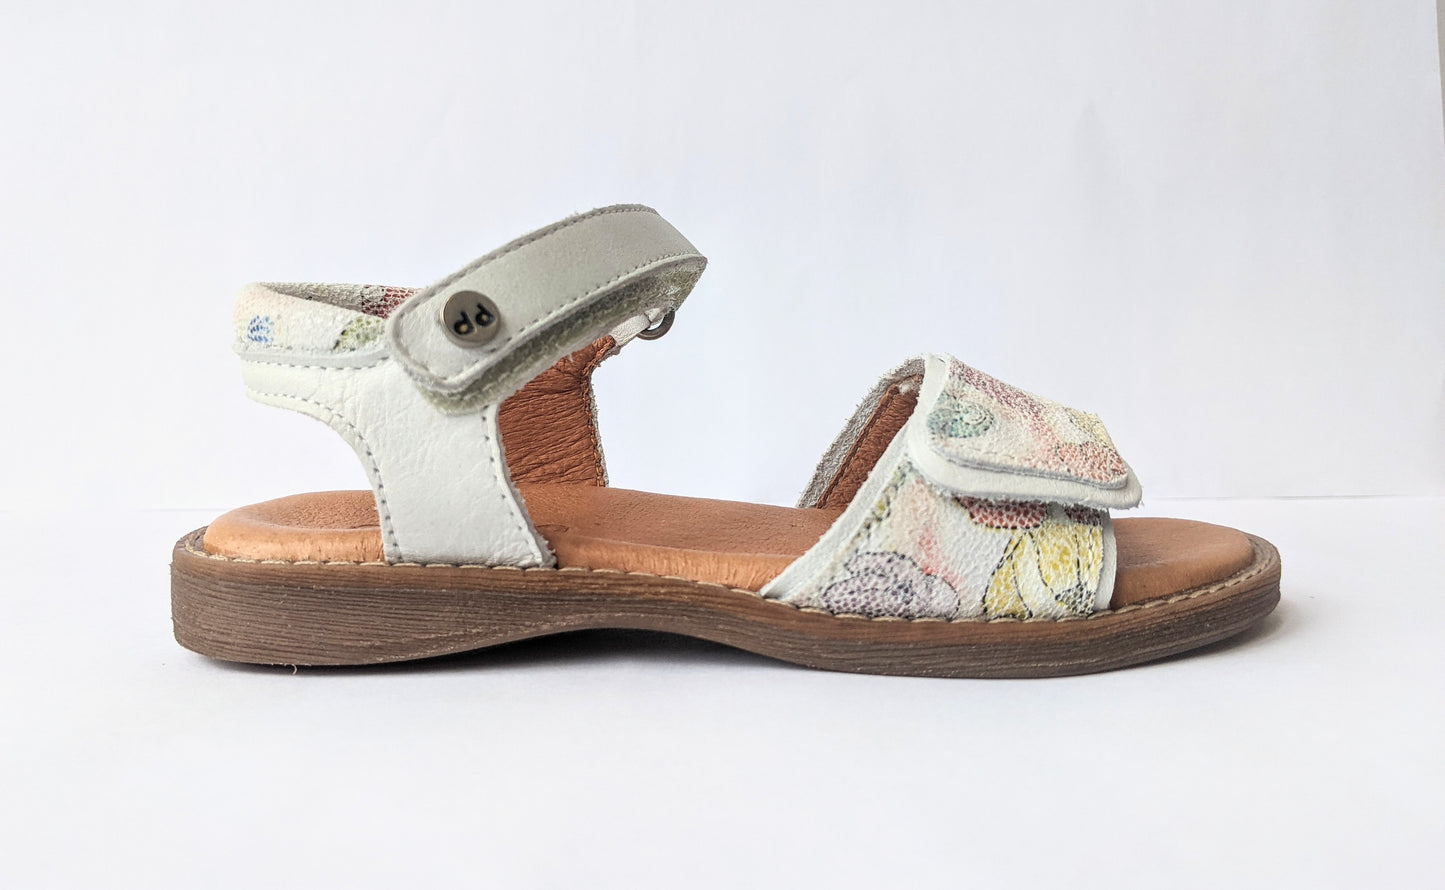 A girls sandal by Froddo,style G3150117-1 in white floral leather with velcro fastening. Right side view.